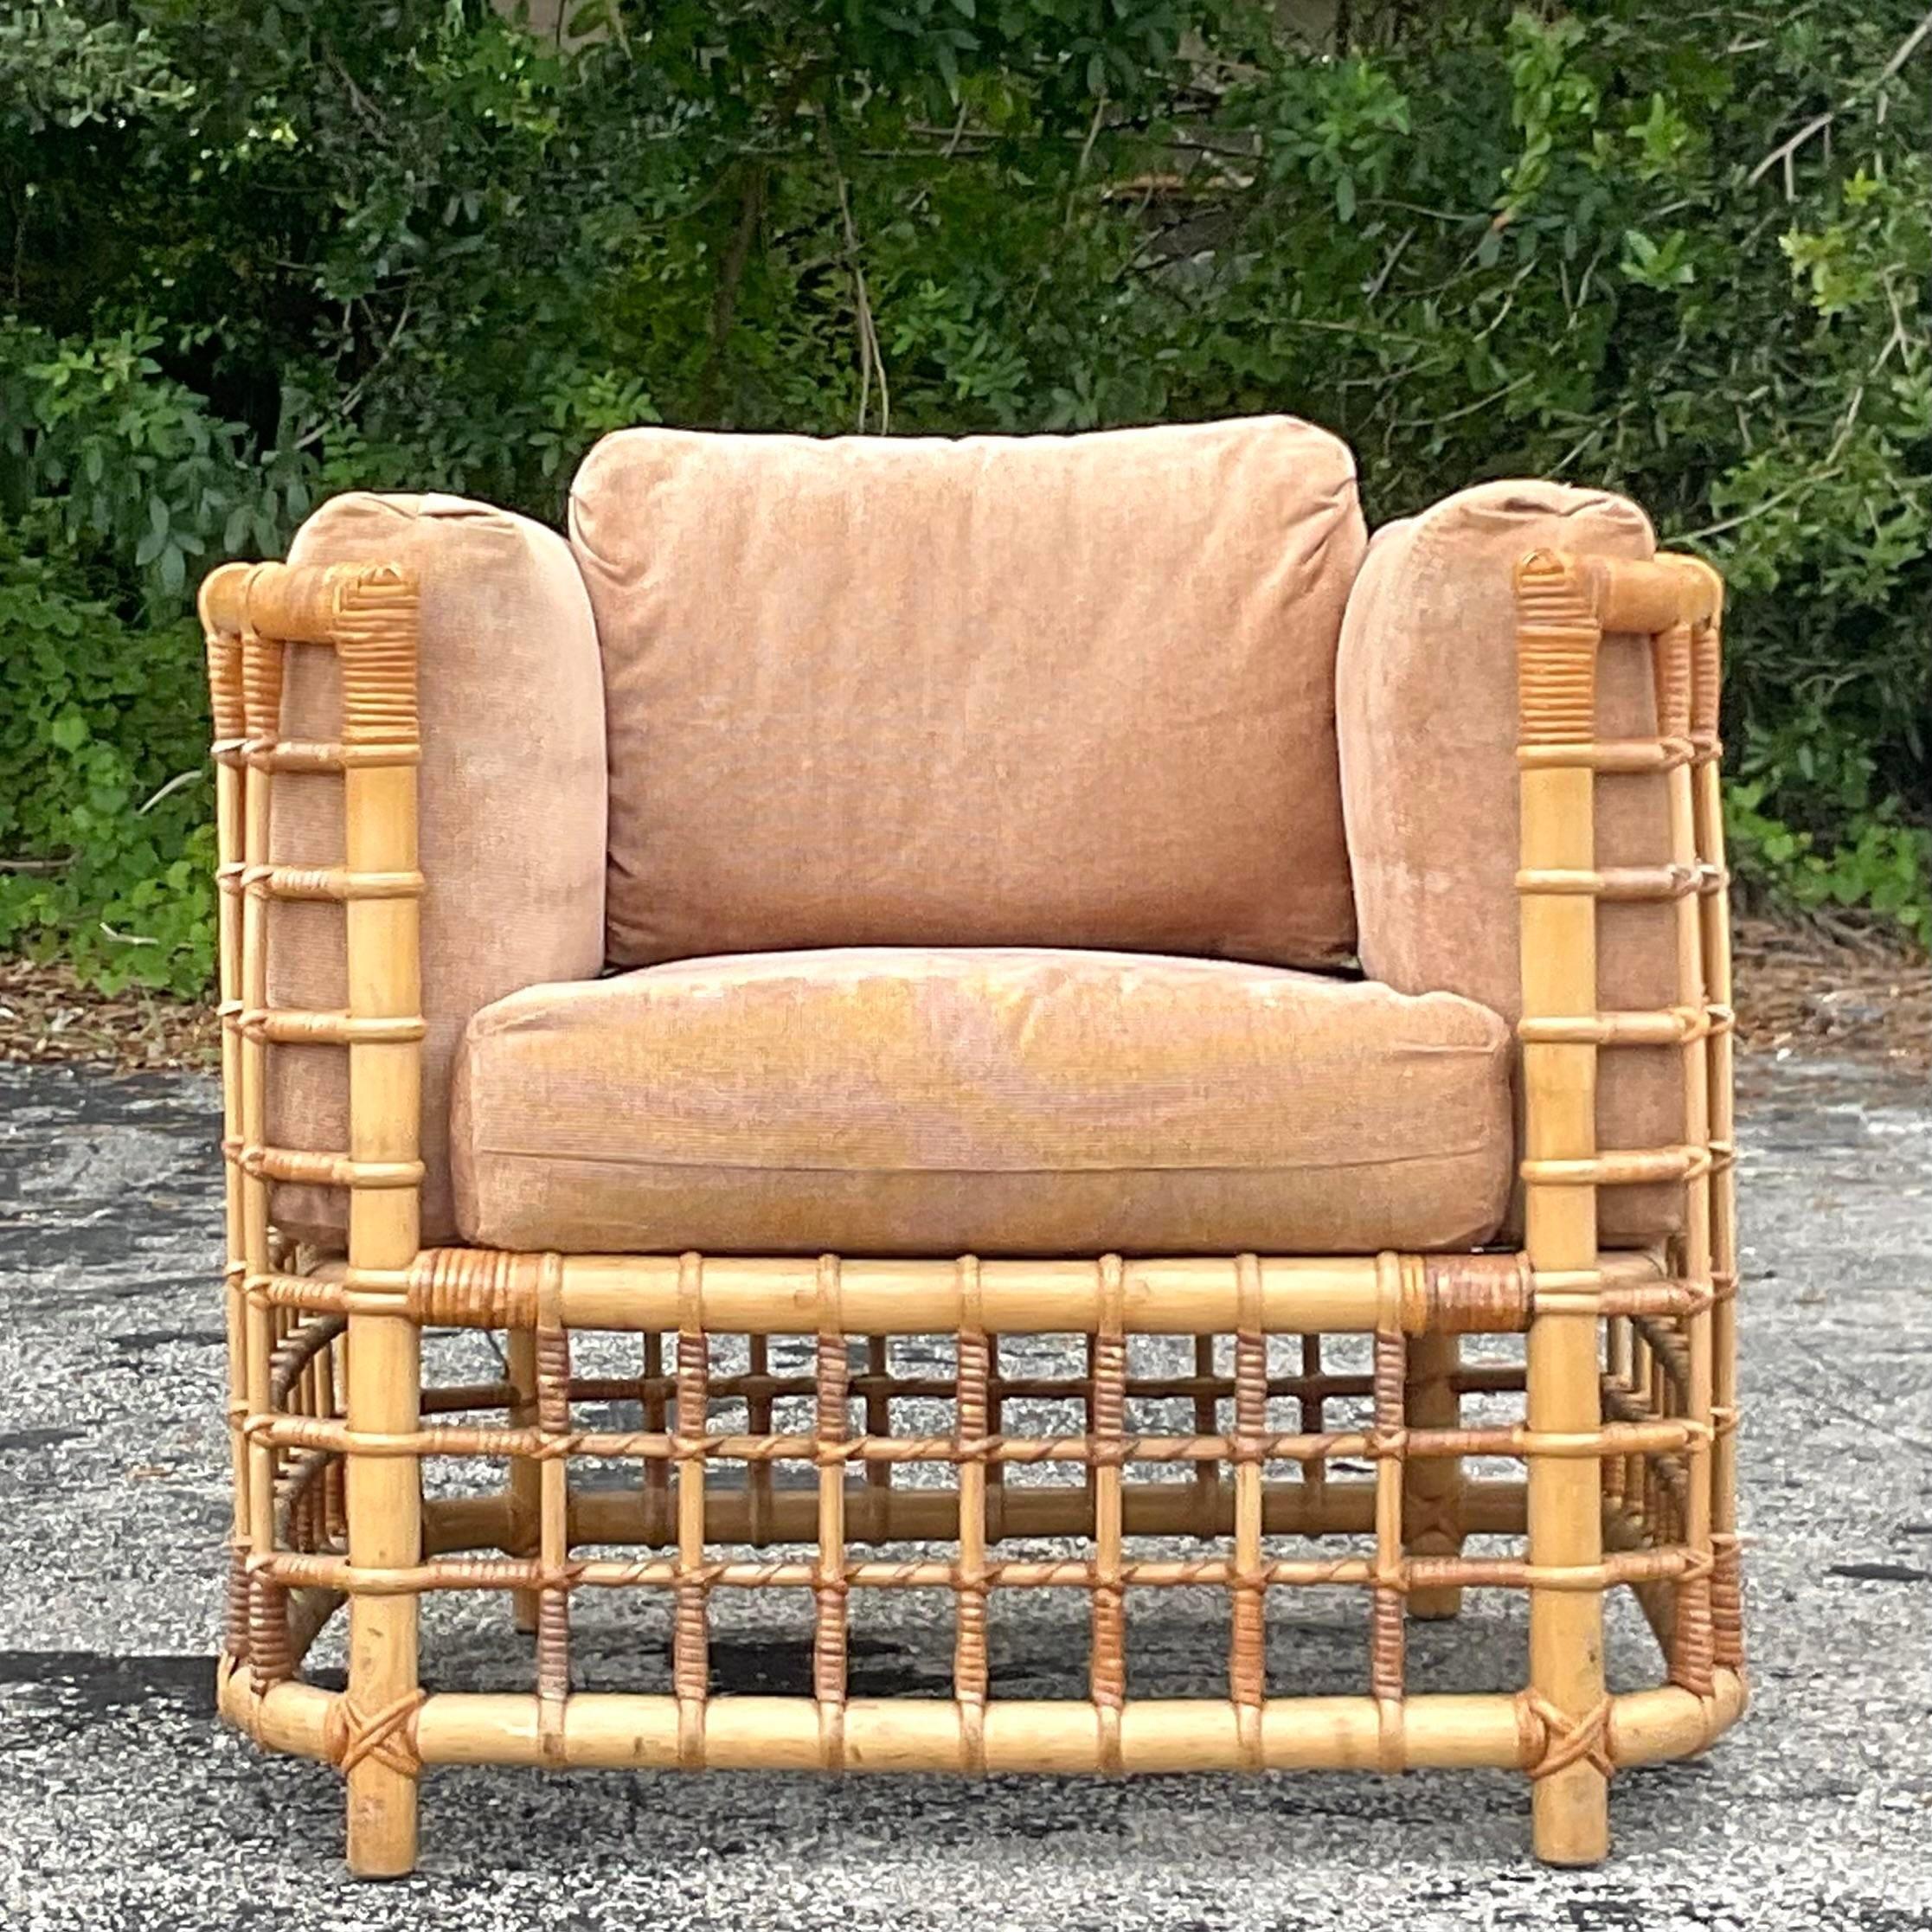 An exceptional vintage Coastal lounge chair. A chic rattan frame in a grid design. Done in the manner of Henry Olko. Acquired from a Palm Beach estate.